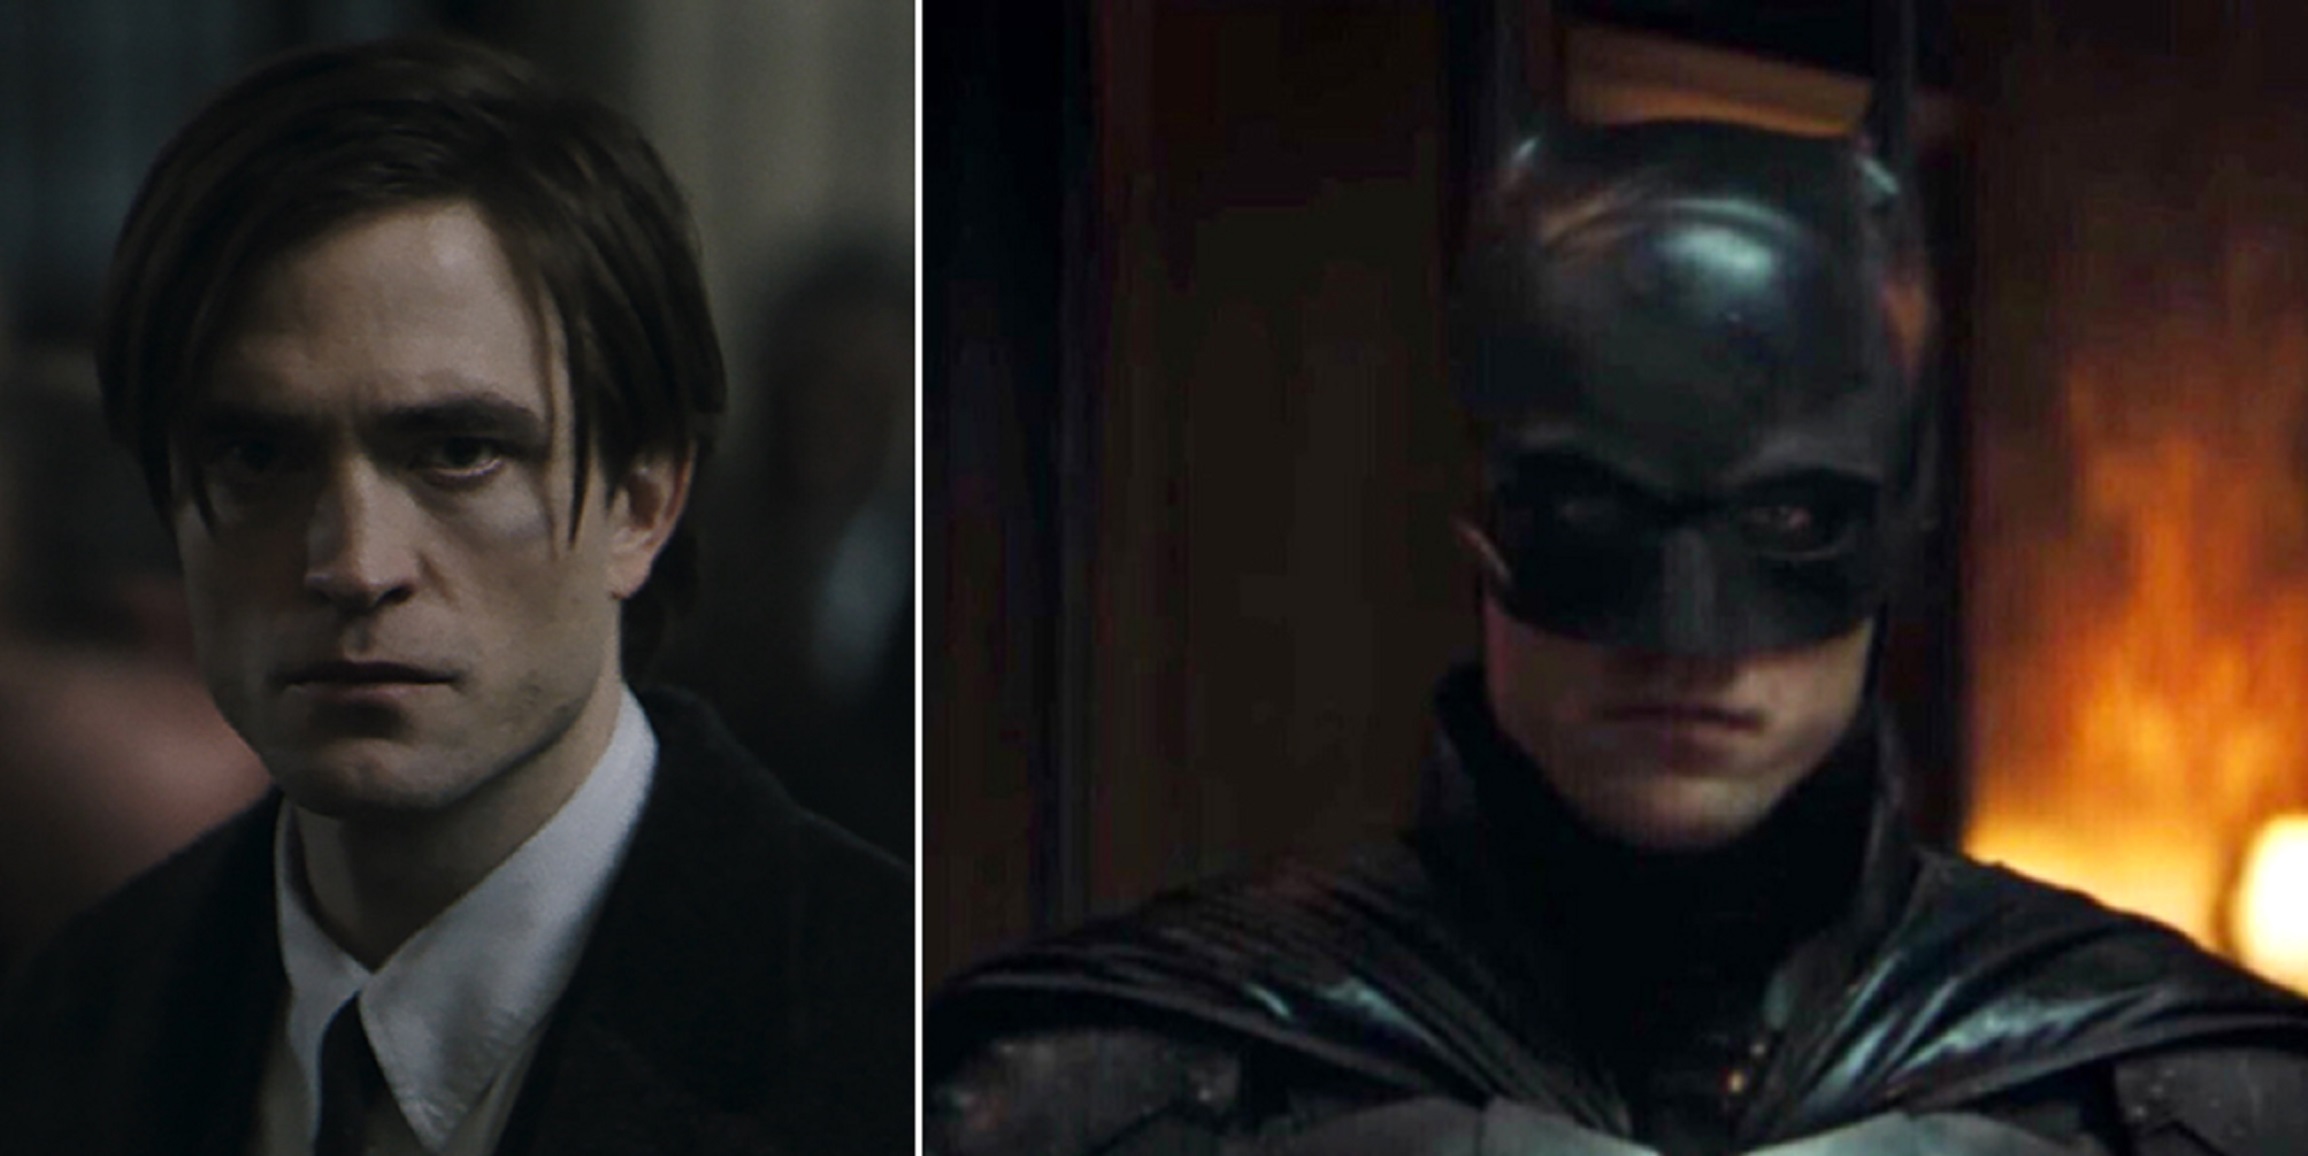 Is Robert Pattinson’s First Look From New Batman Movie a Hit Or a Miss? Vote Here!